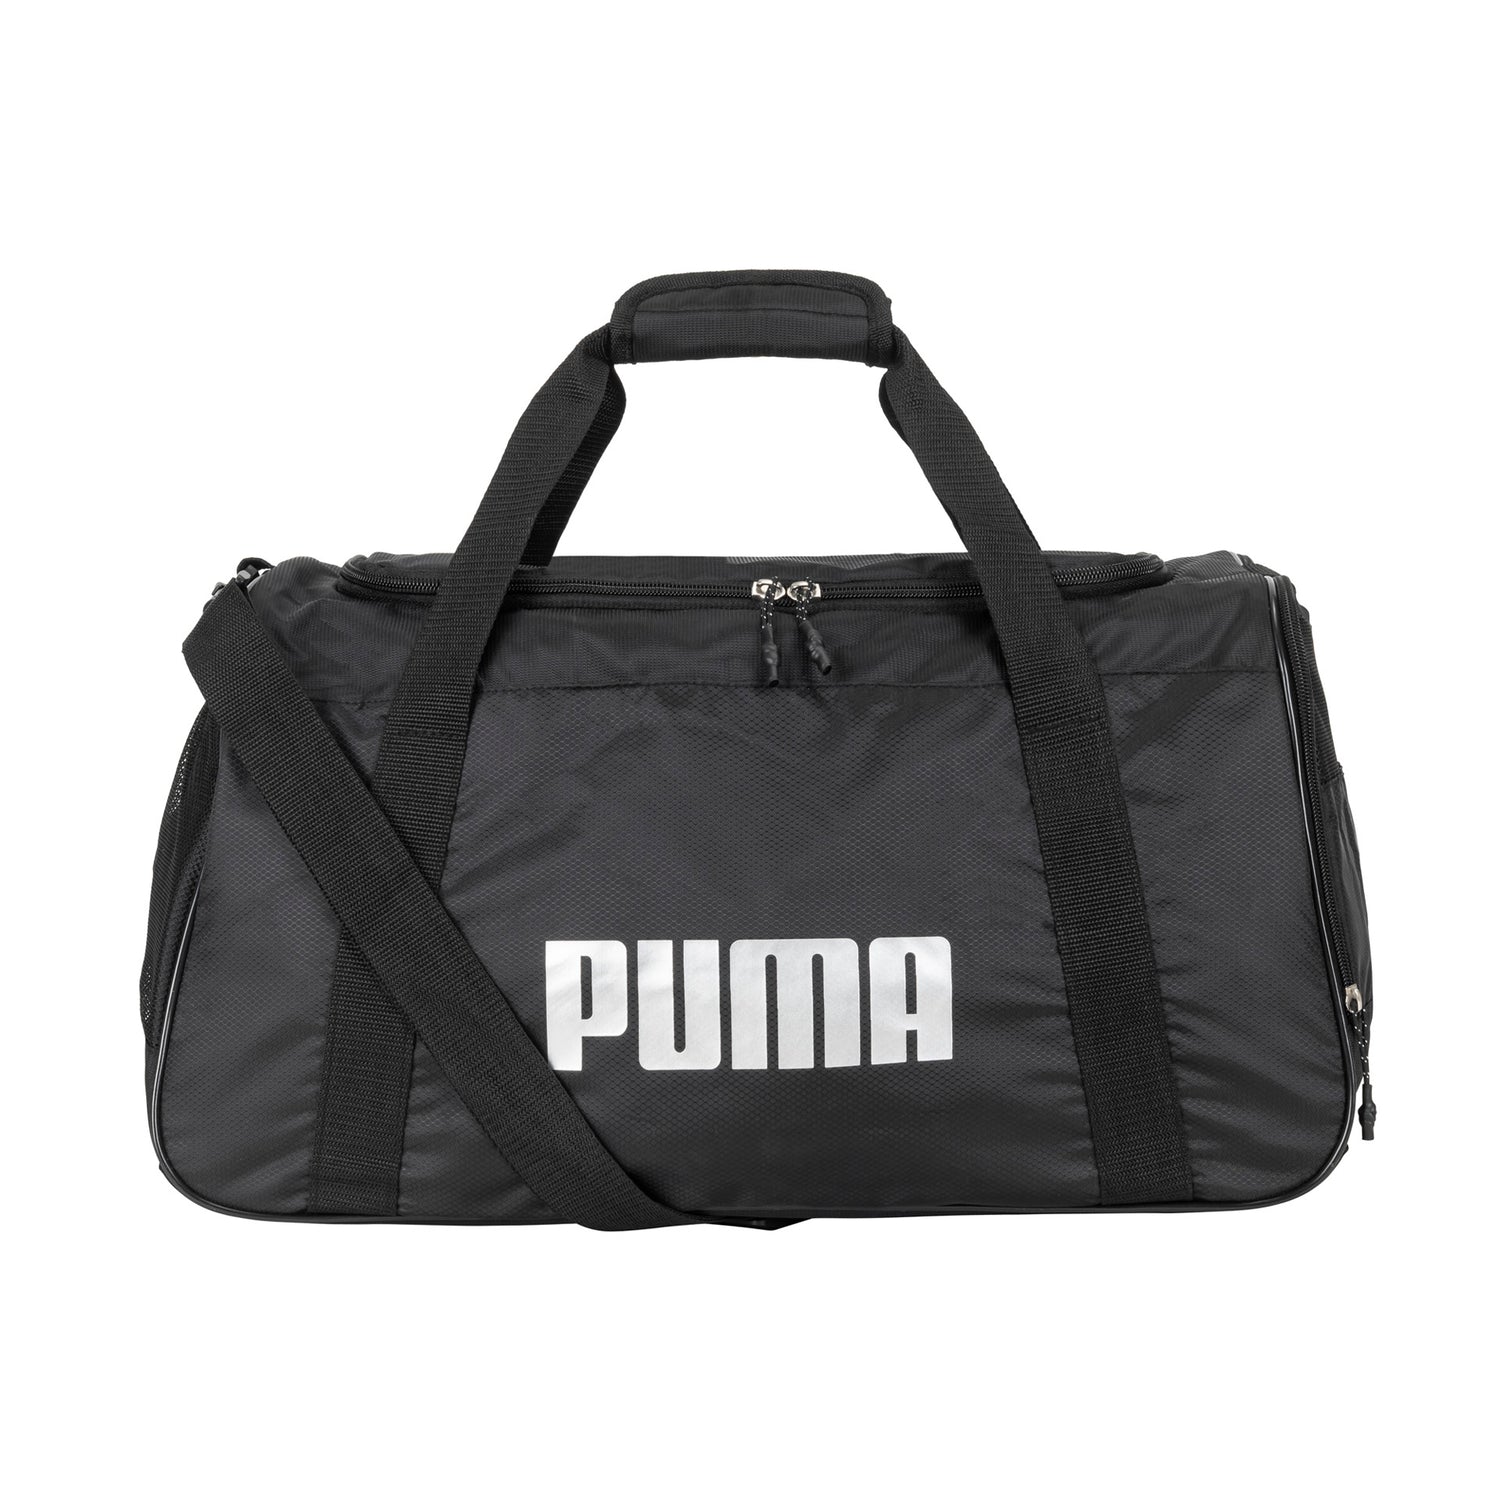 Front side of a black duffle bag called Foundation by Puma on white background, showing its top handles and shoulder strap with the Puma logo printed in front.